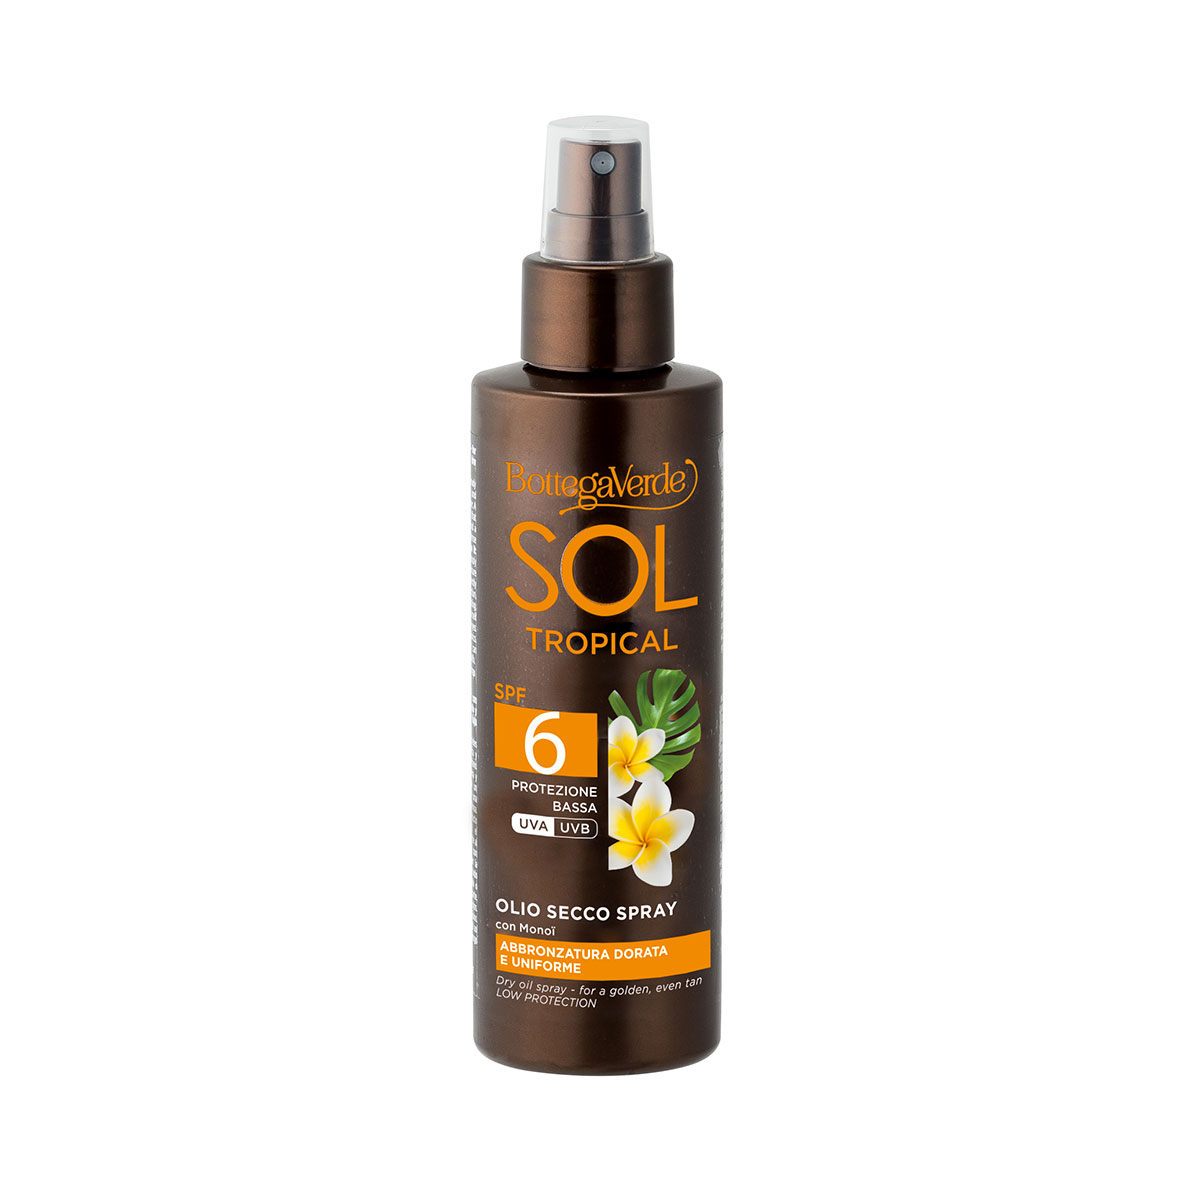 SOL Tropical - Dry oil spray - even, golden tanning - with Monoï - SPF6 low protection